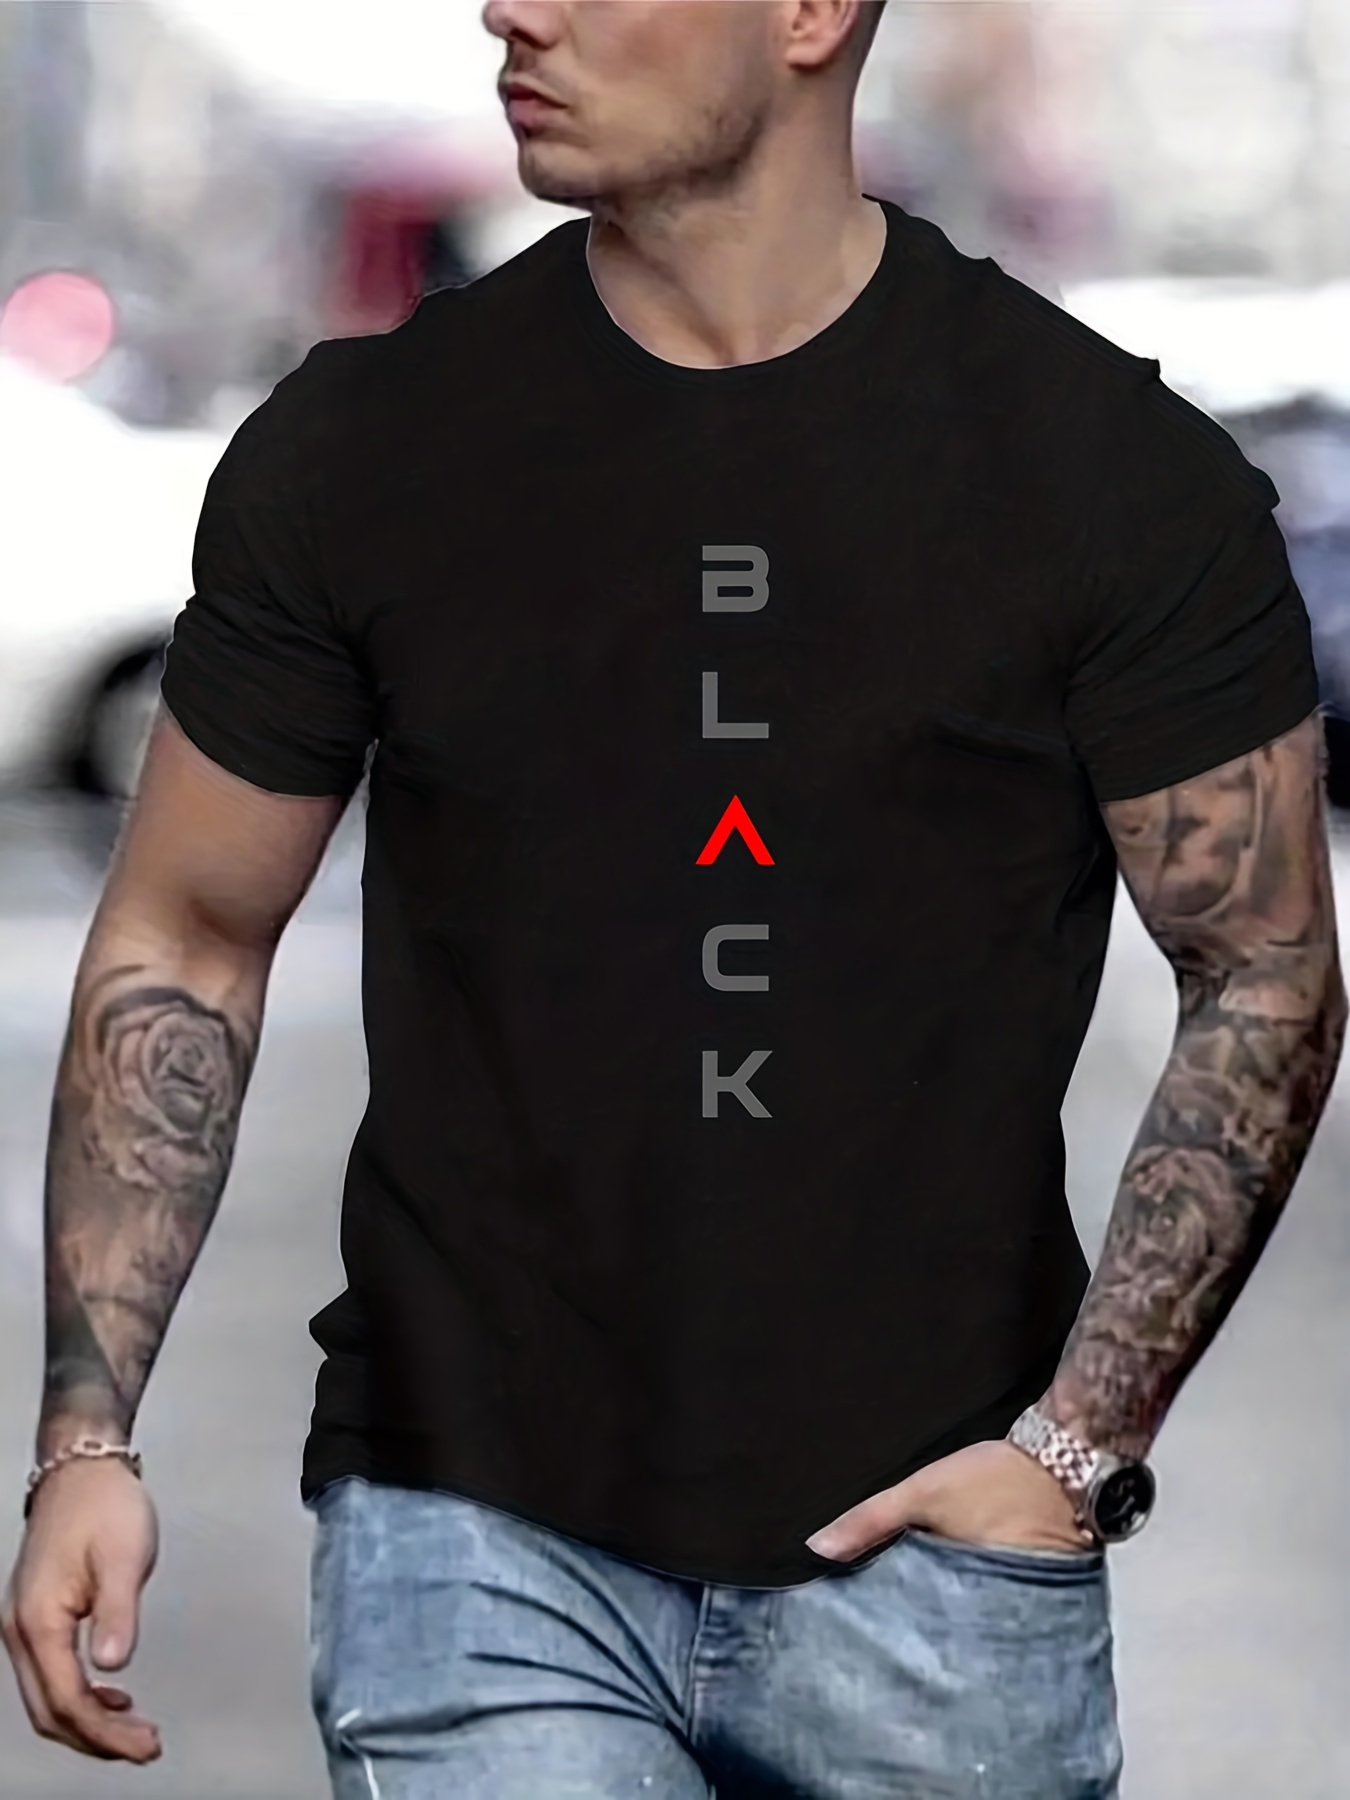 black print tee shirt tee for men casual short sleeve t shirt for summer spring fall tops as gifts details 21